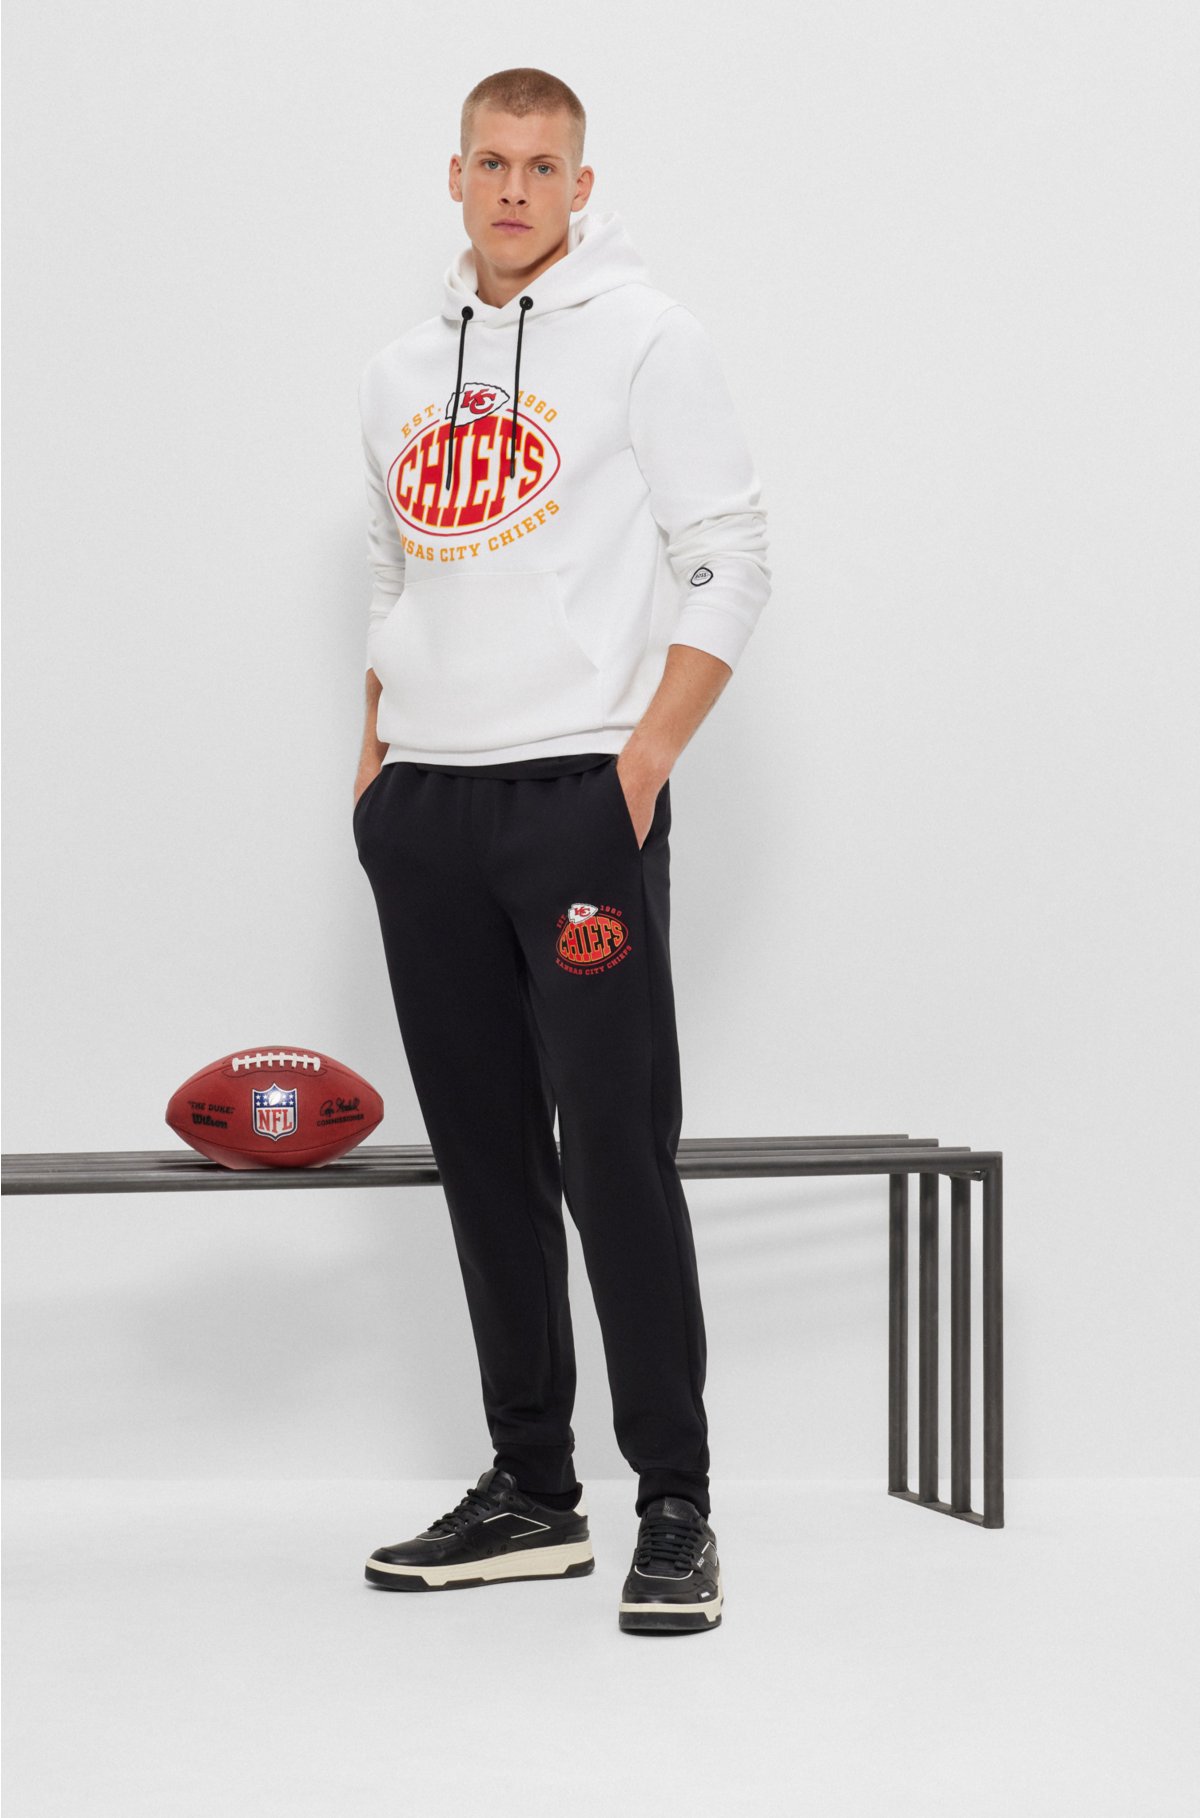  BOSS x NFL cotton-blend hoodie with collaborative branding, Chiefs